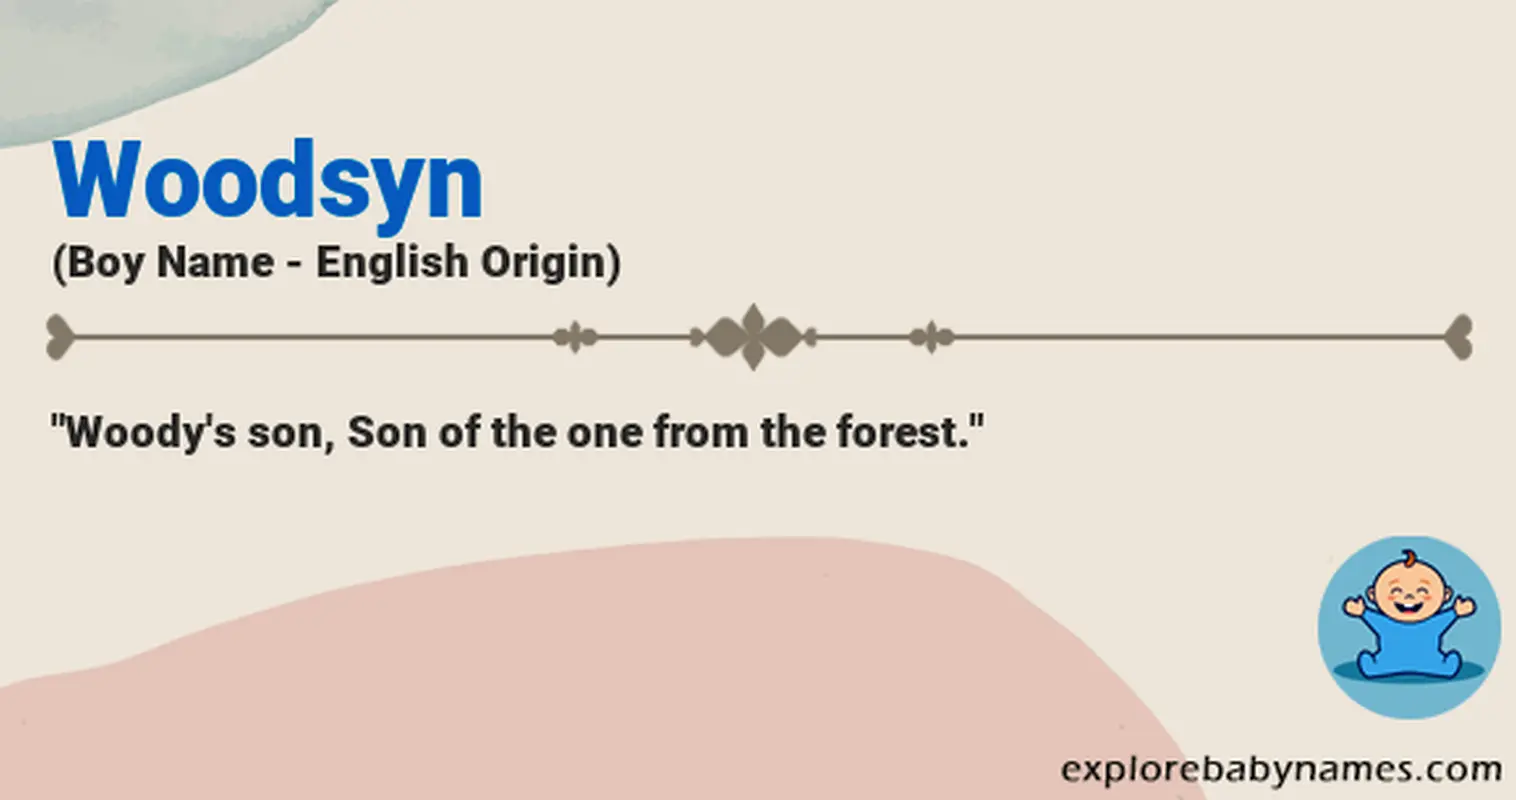 Meaning of Woodsyn